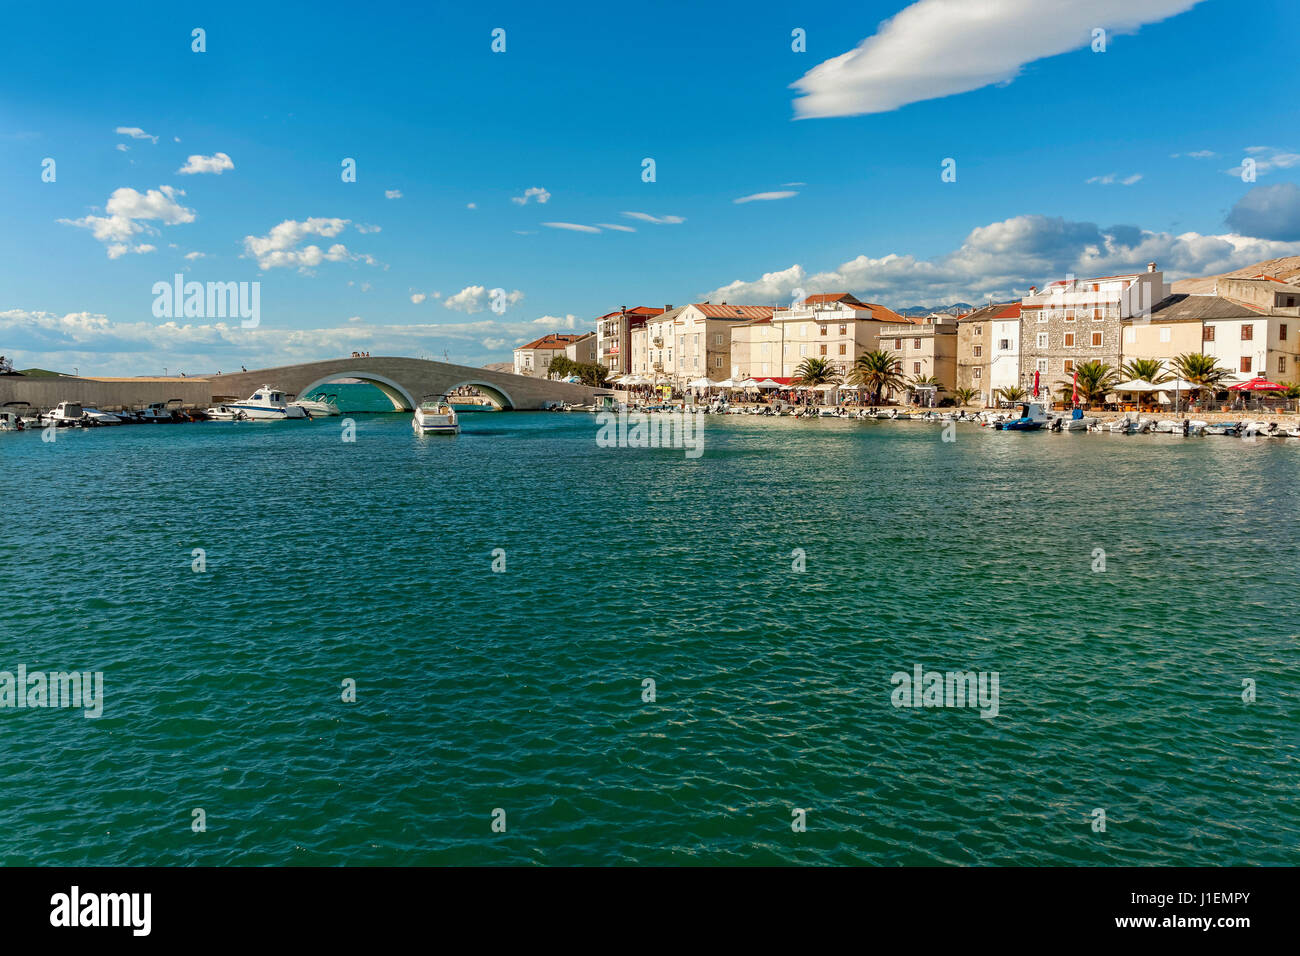 Stadt Pag, Insel Pag, Kroatien Stockfoto